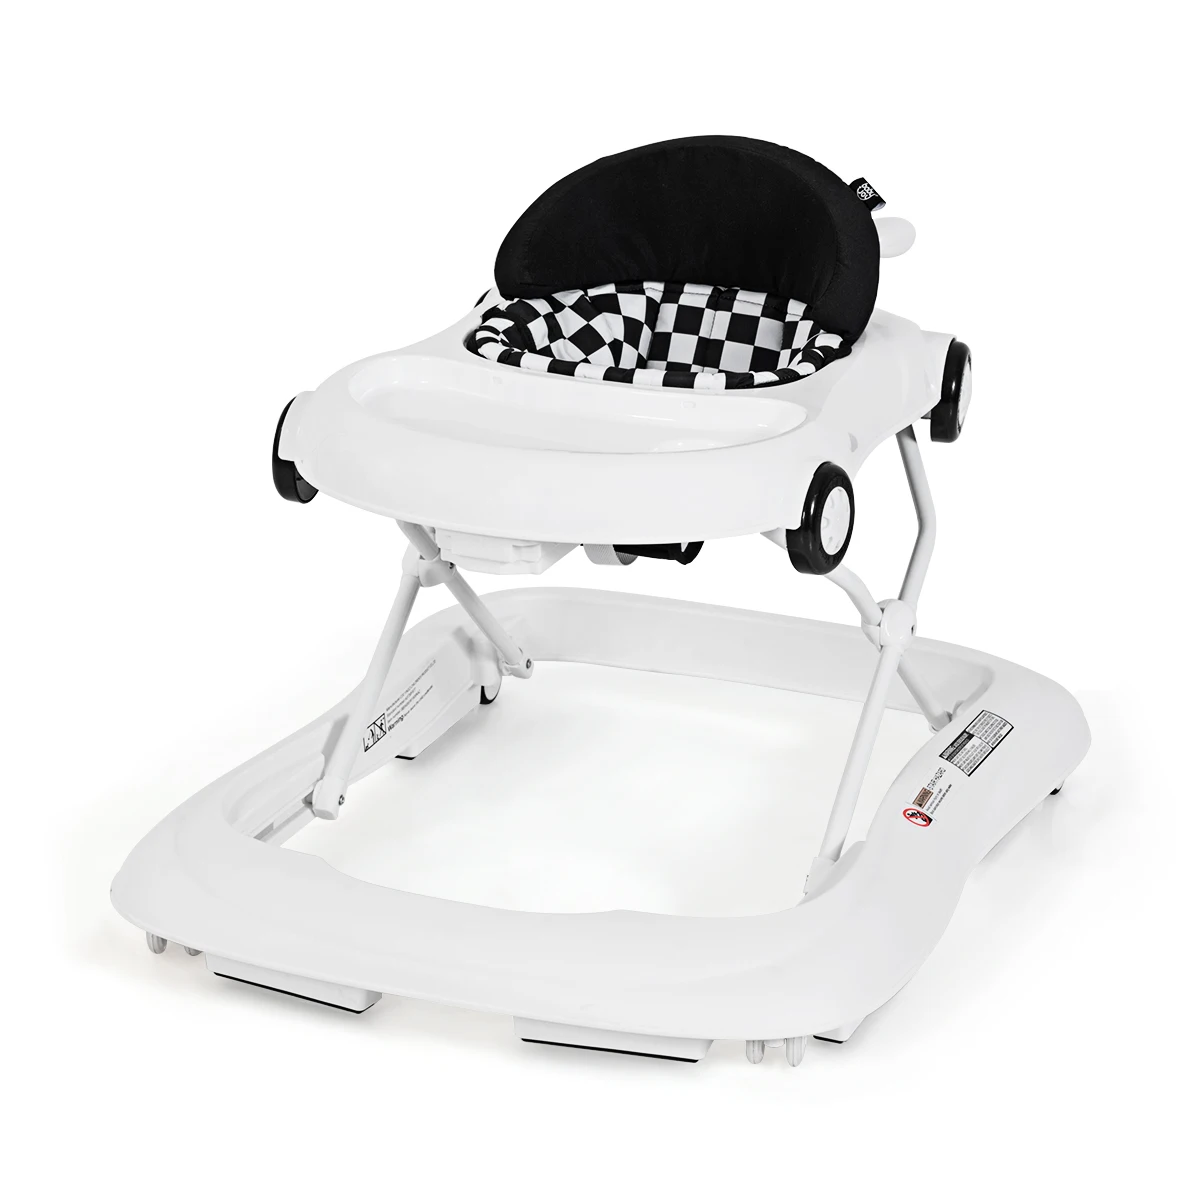 2-in-1 Foldable Baby Walker Adjustable Heights W/ Music Player & Lights White